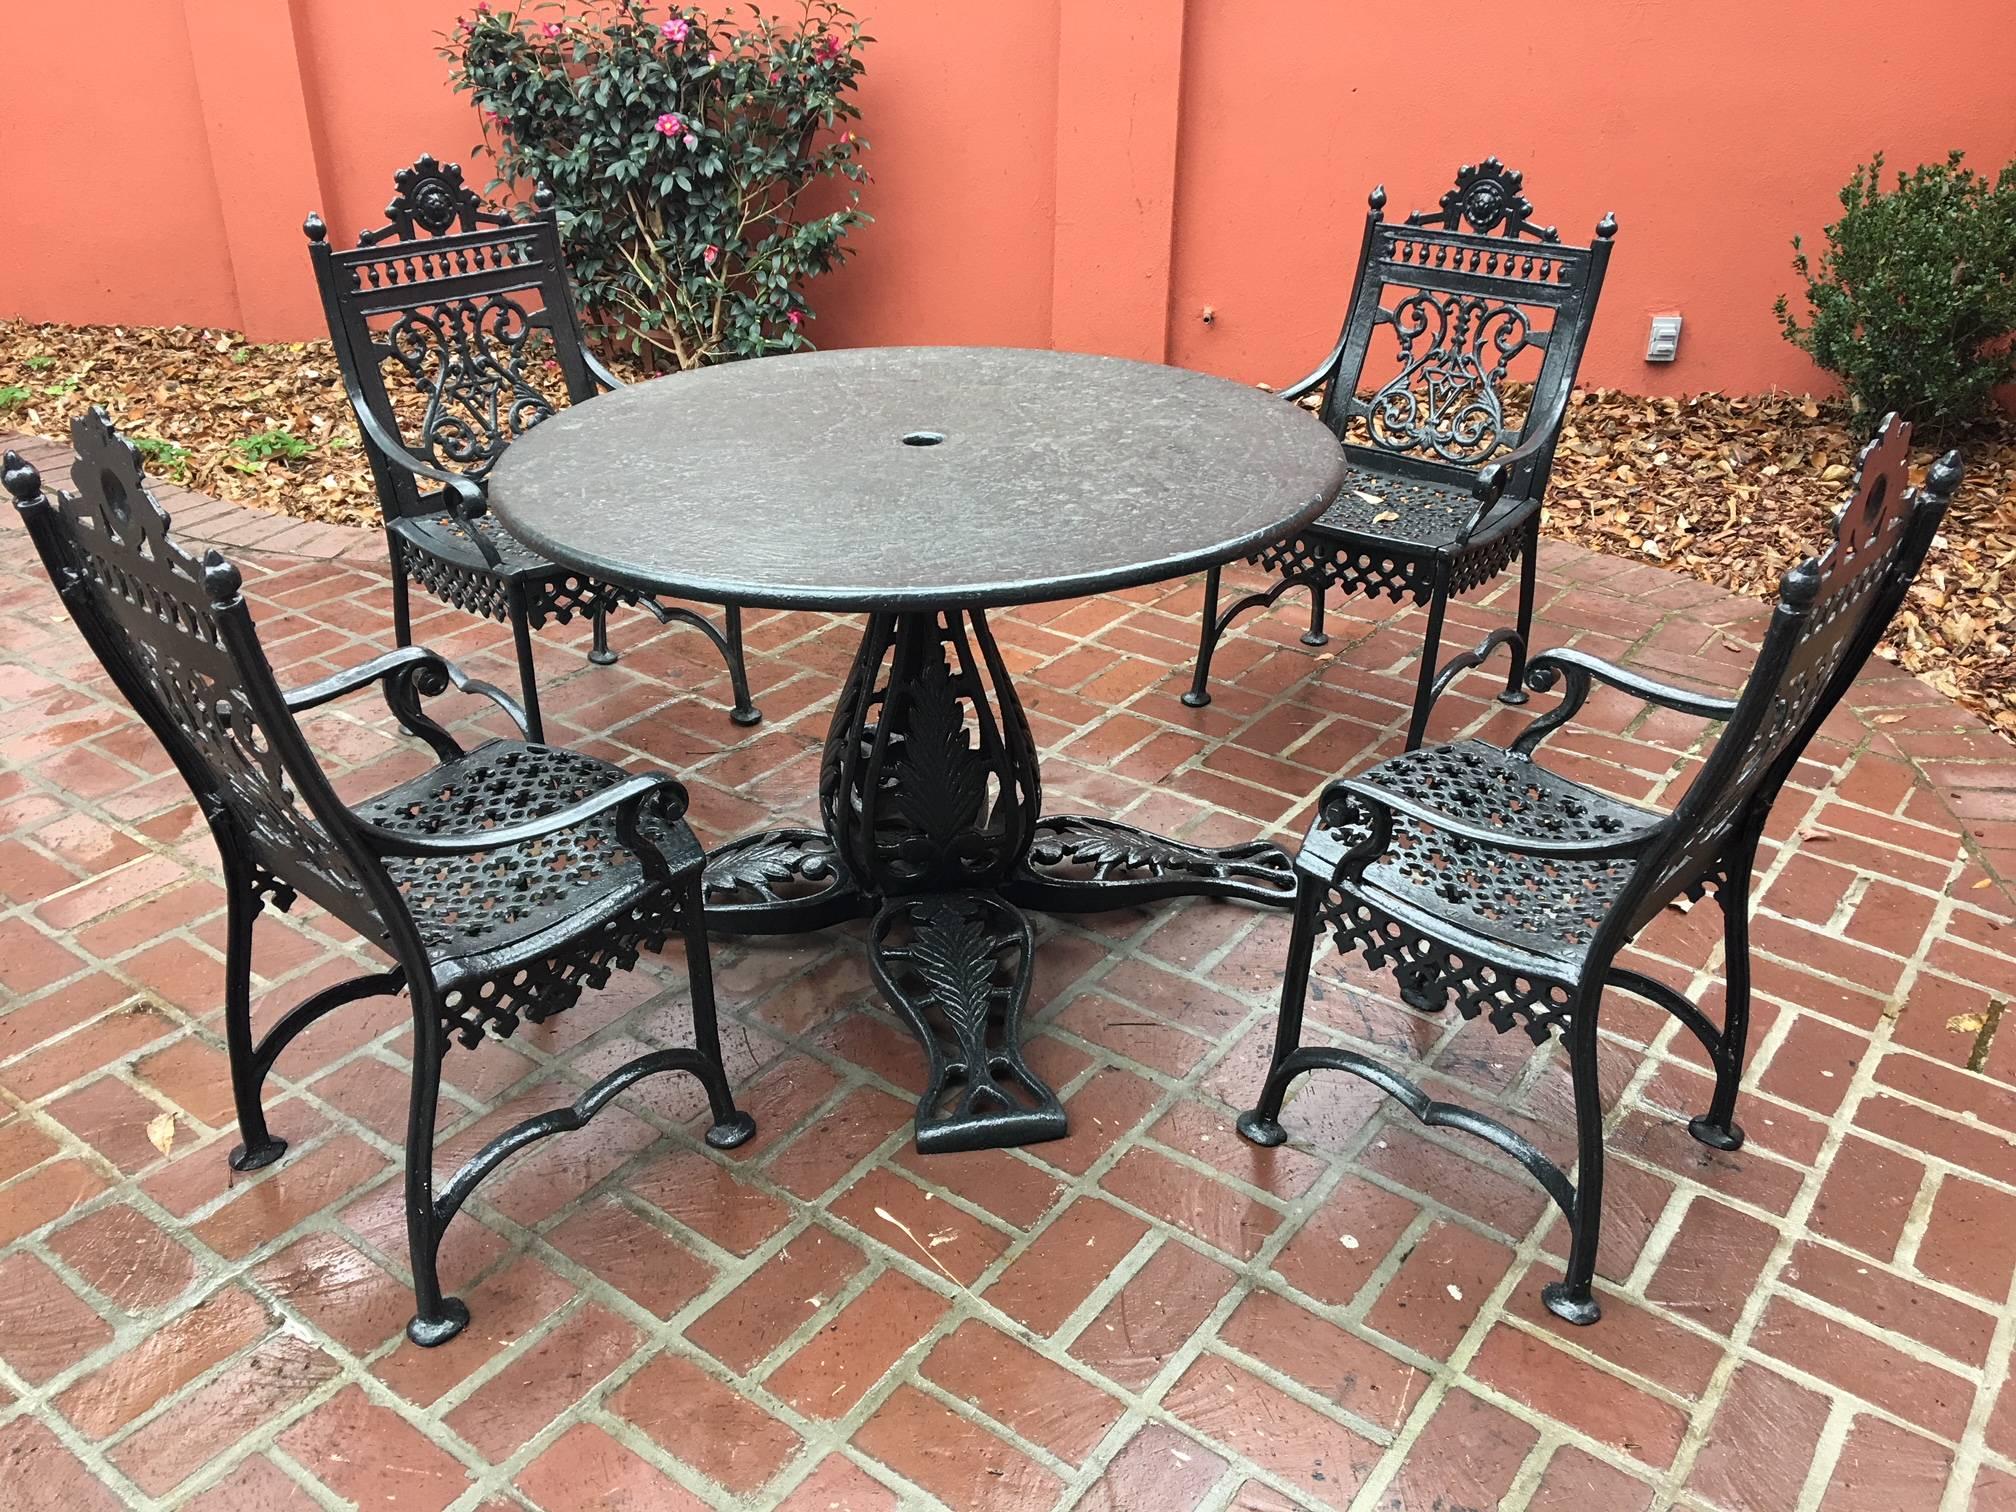 Five-piece cast iron patio set, marked in casting early Victorian Jacobs Mfg. Co. Bridgeport, Alabama, circa 1940. Dimensions: 27.25